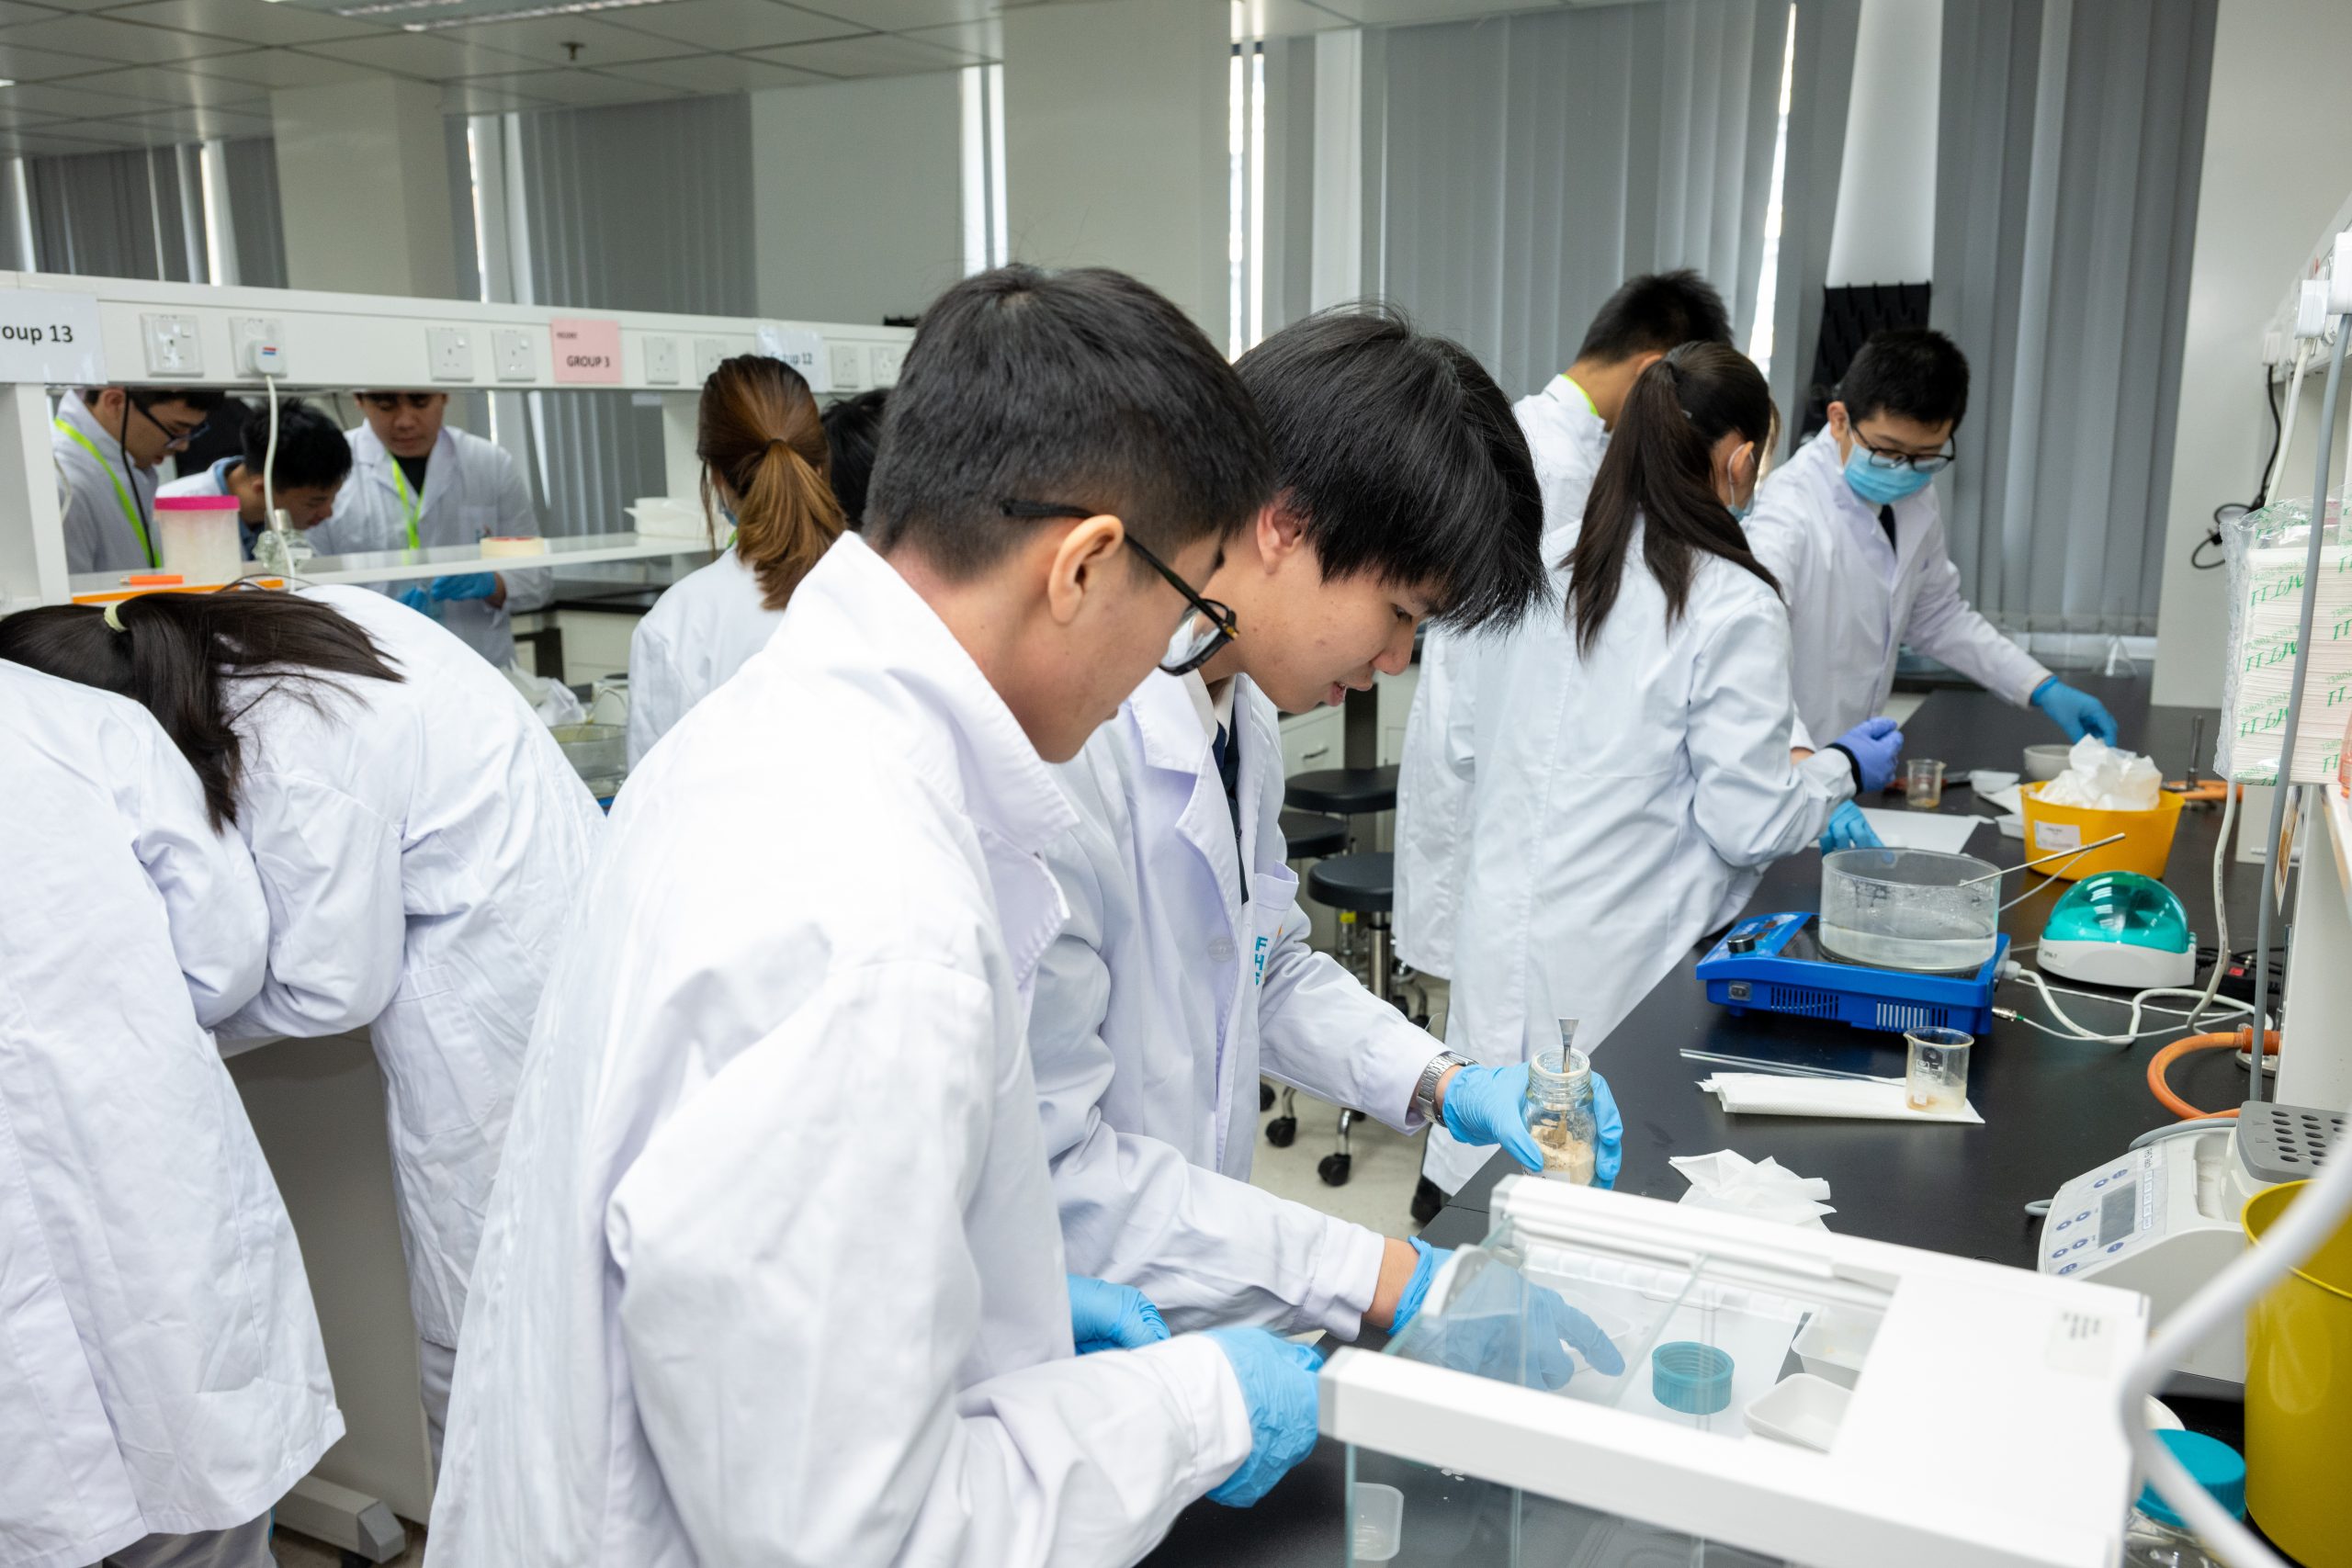 UM FHS organises science activity for secondary students to enhance their laboratory skills